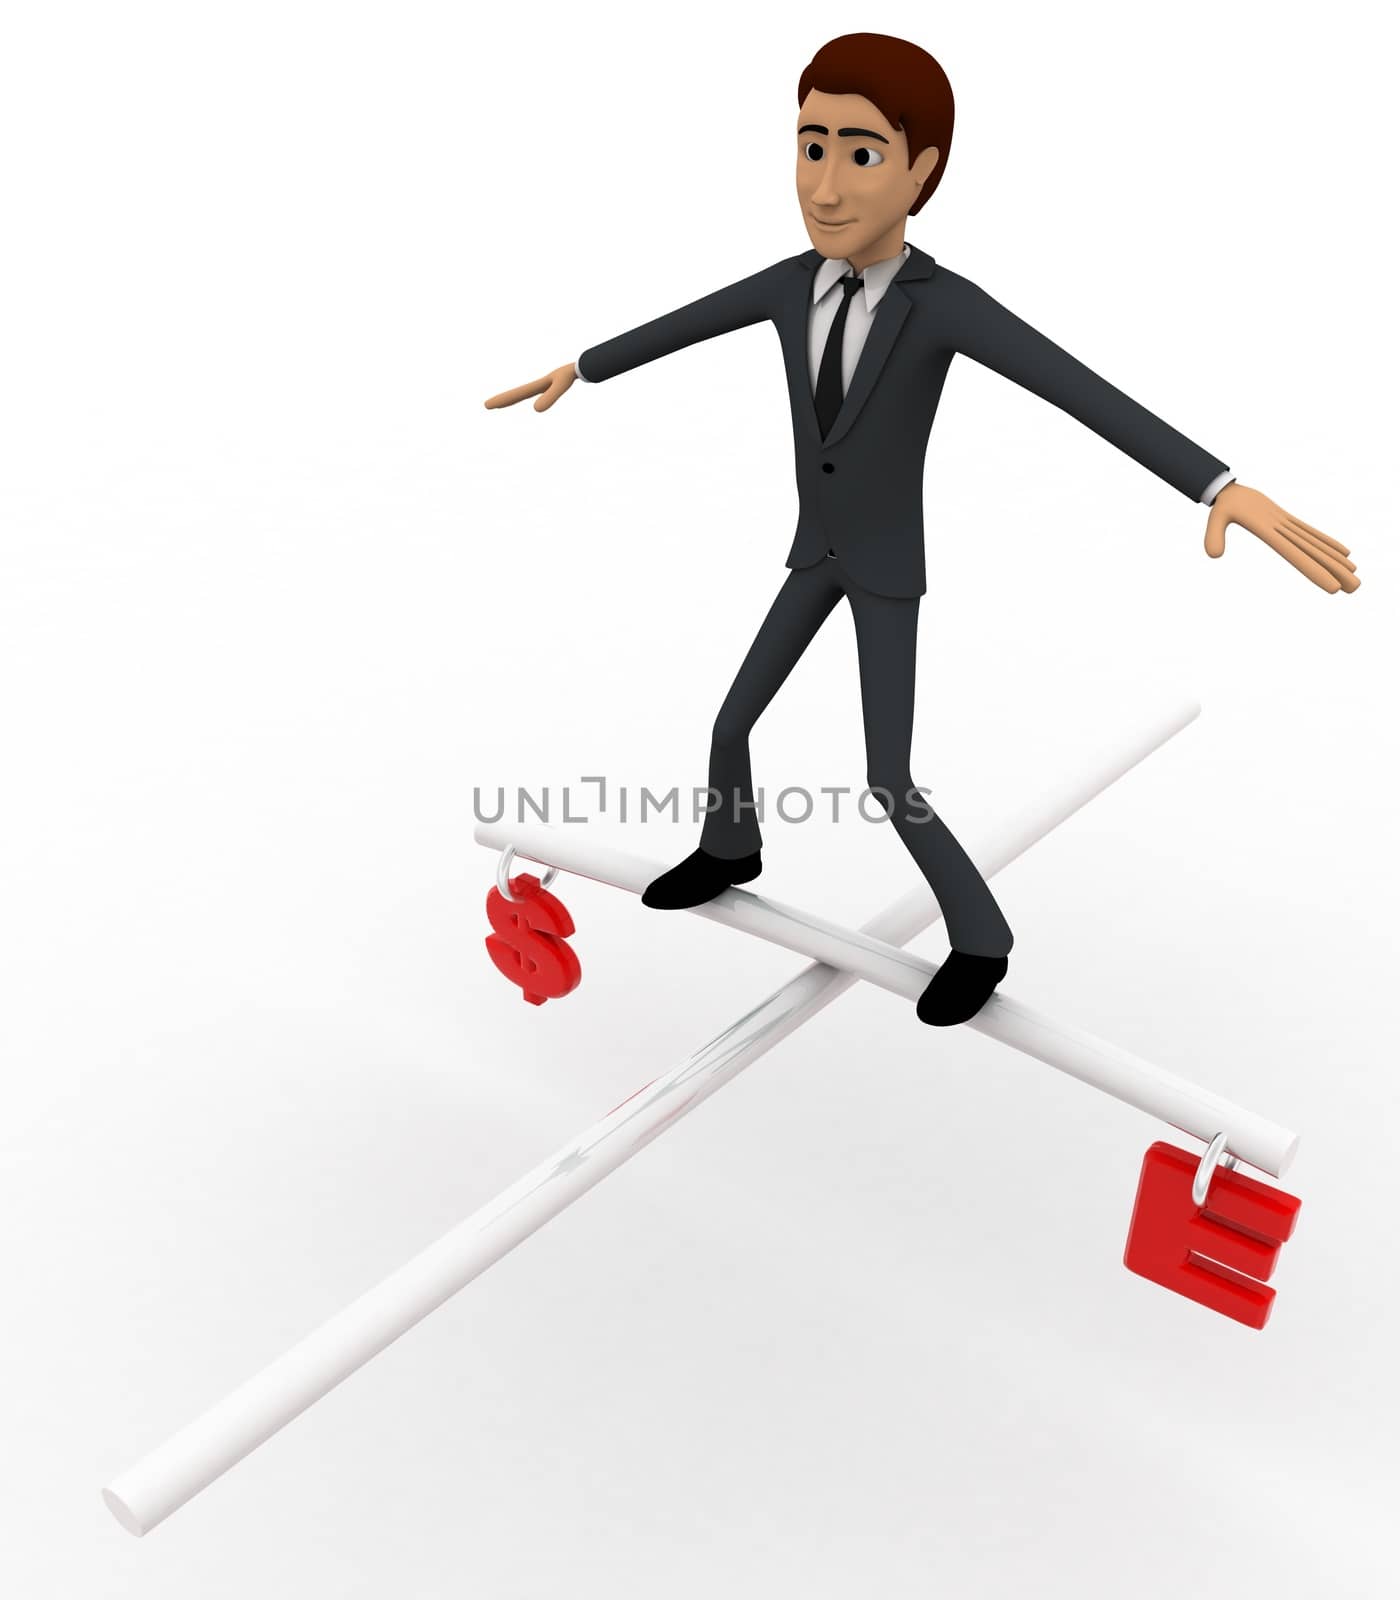 3d man balancing dollar and euro currency on rope concept by touchmenithin@gmail.com